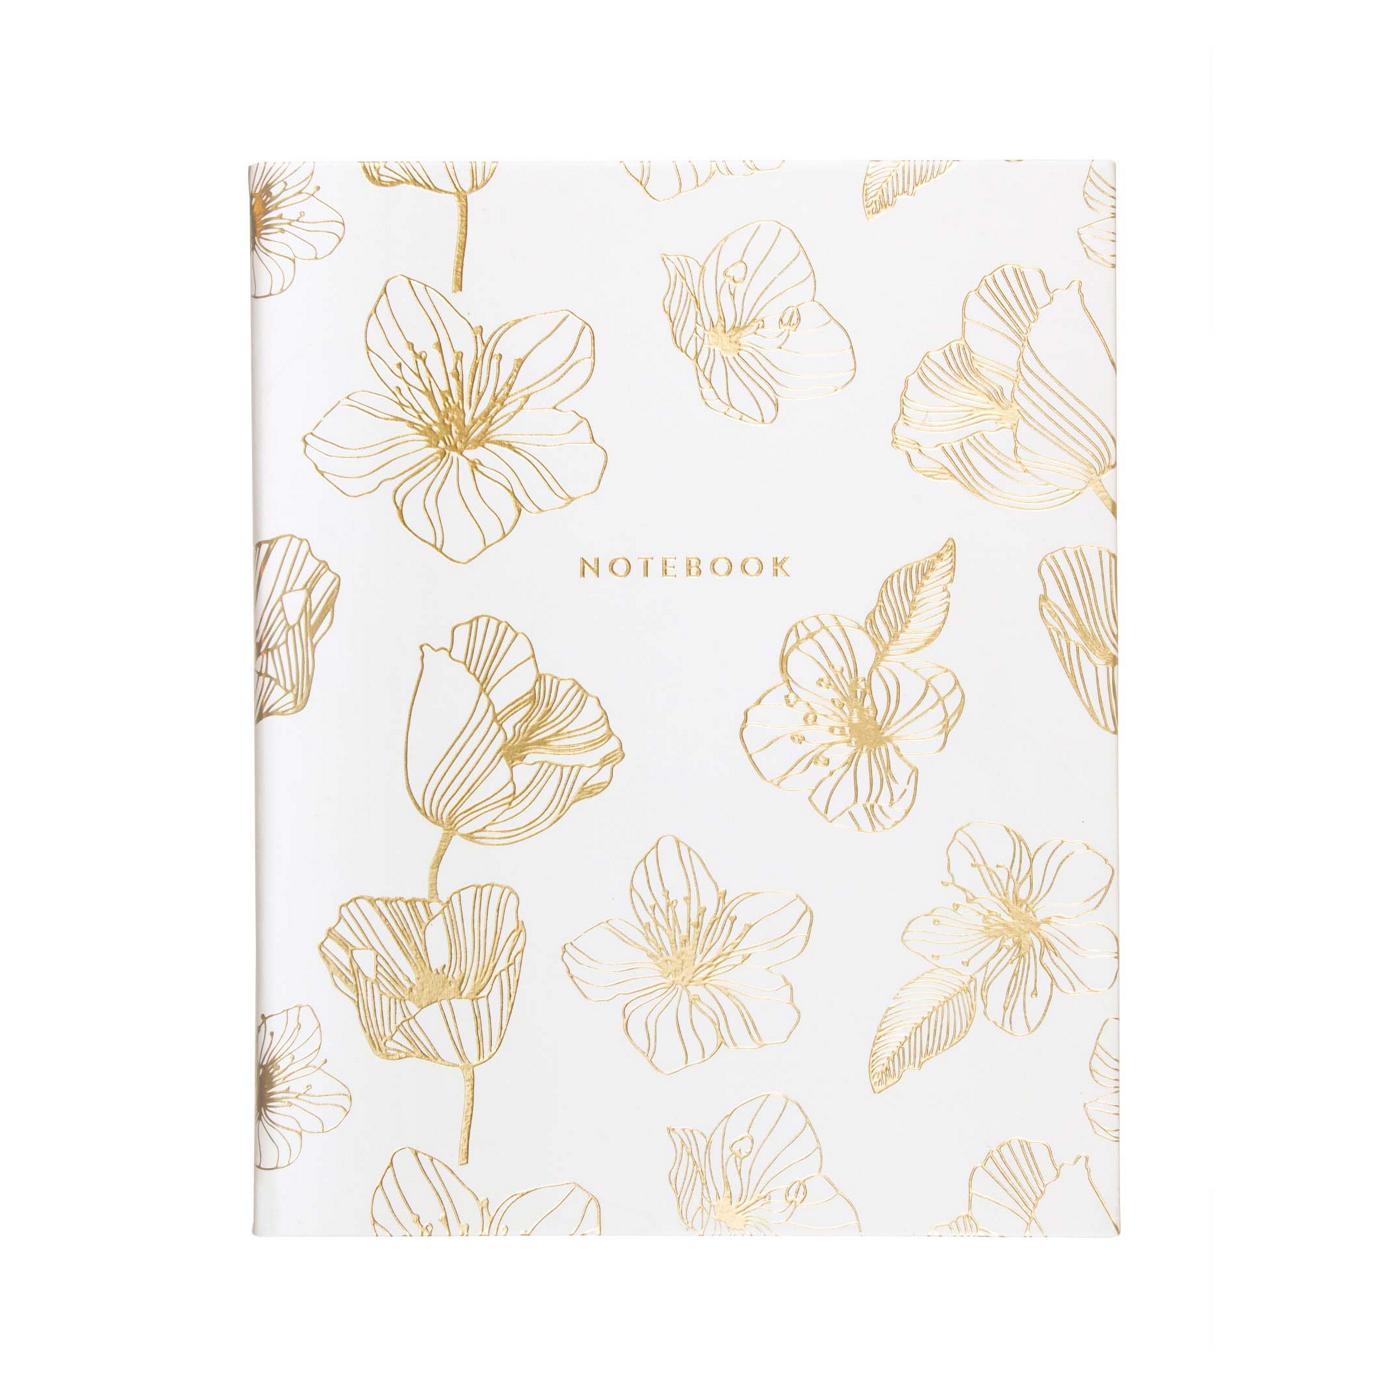 Eccolo Gold Flower Sketches Journal; image 1 of 3